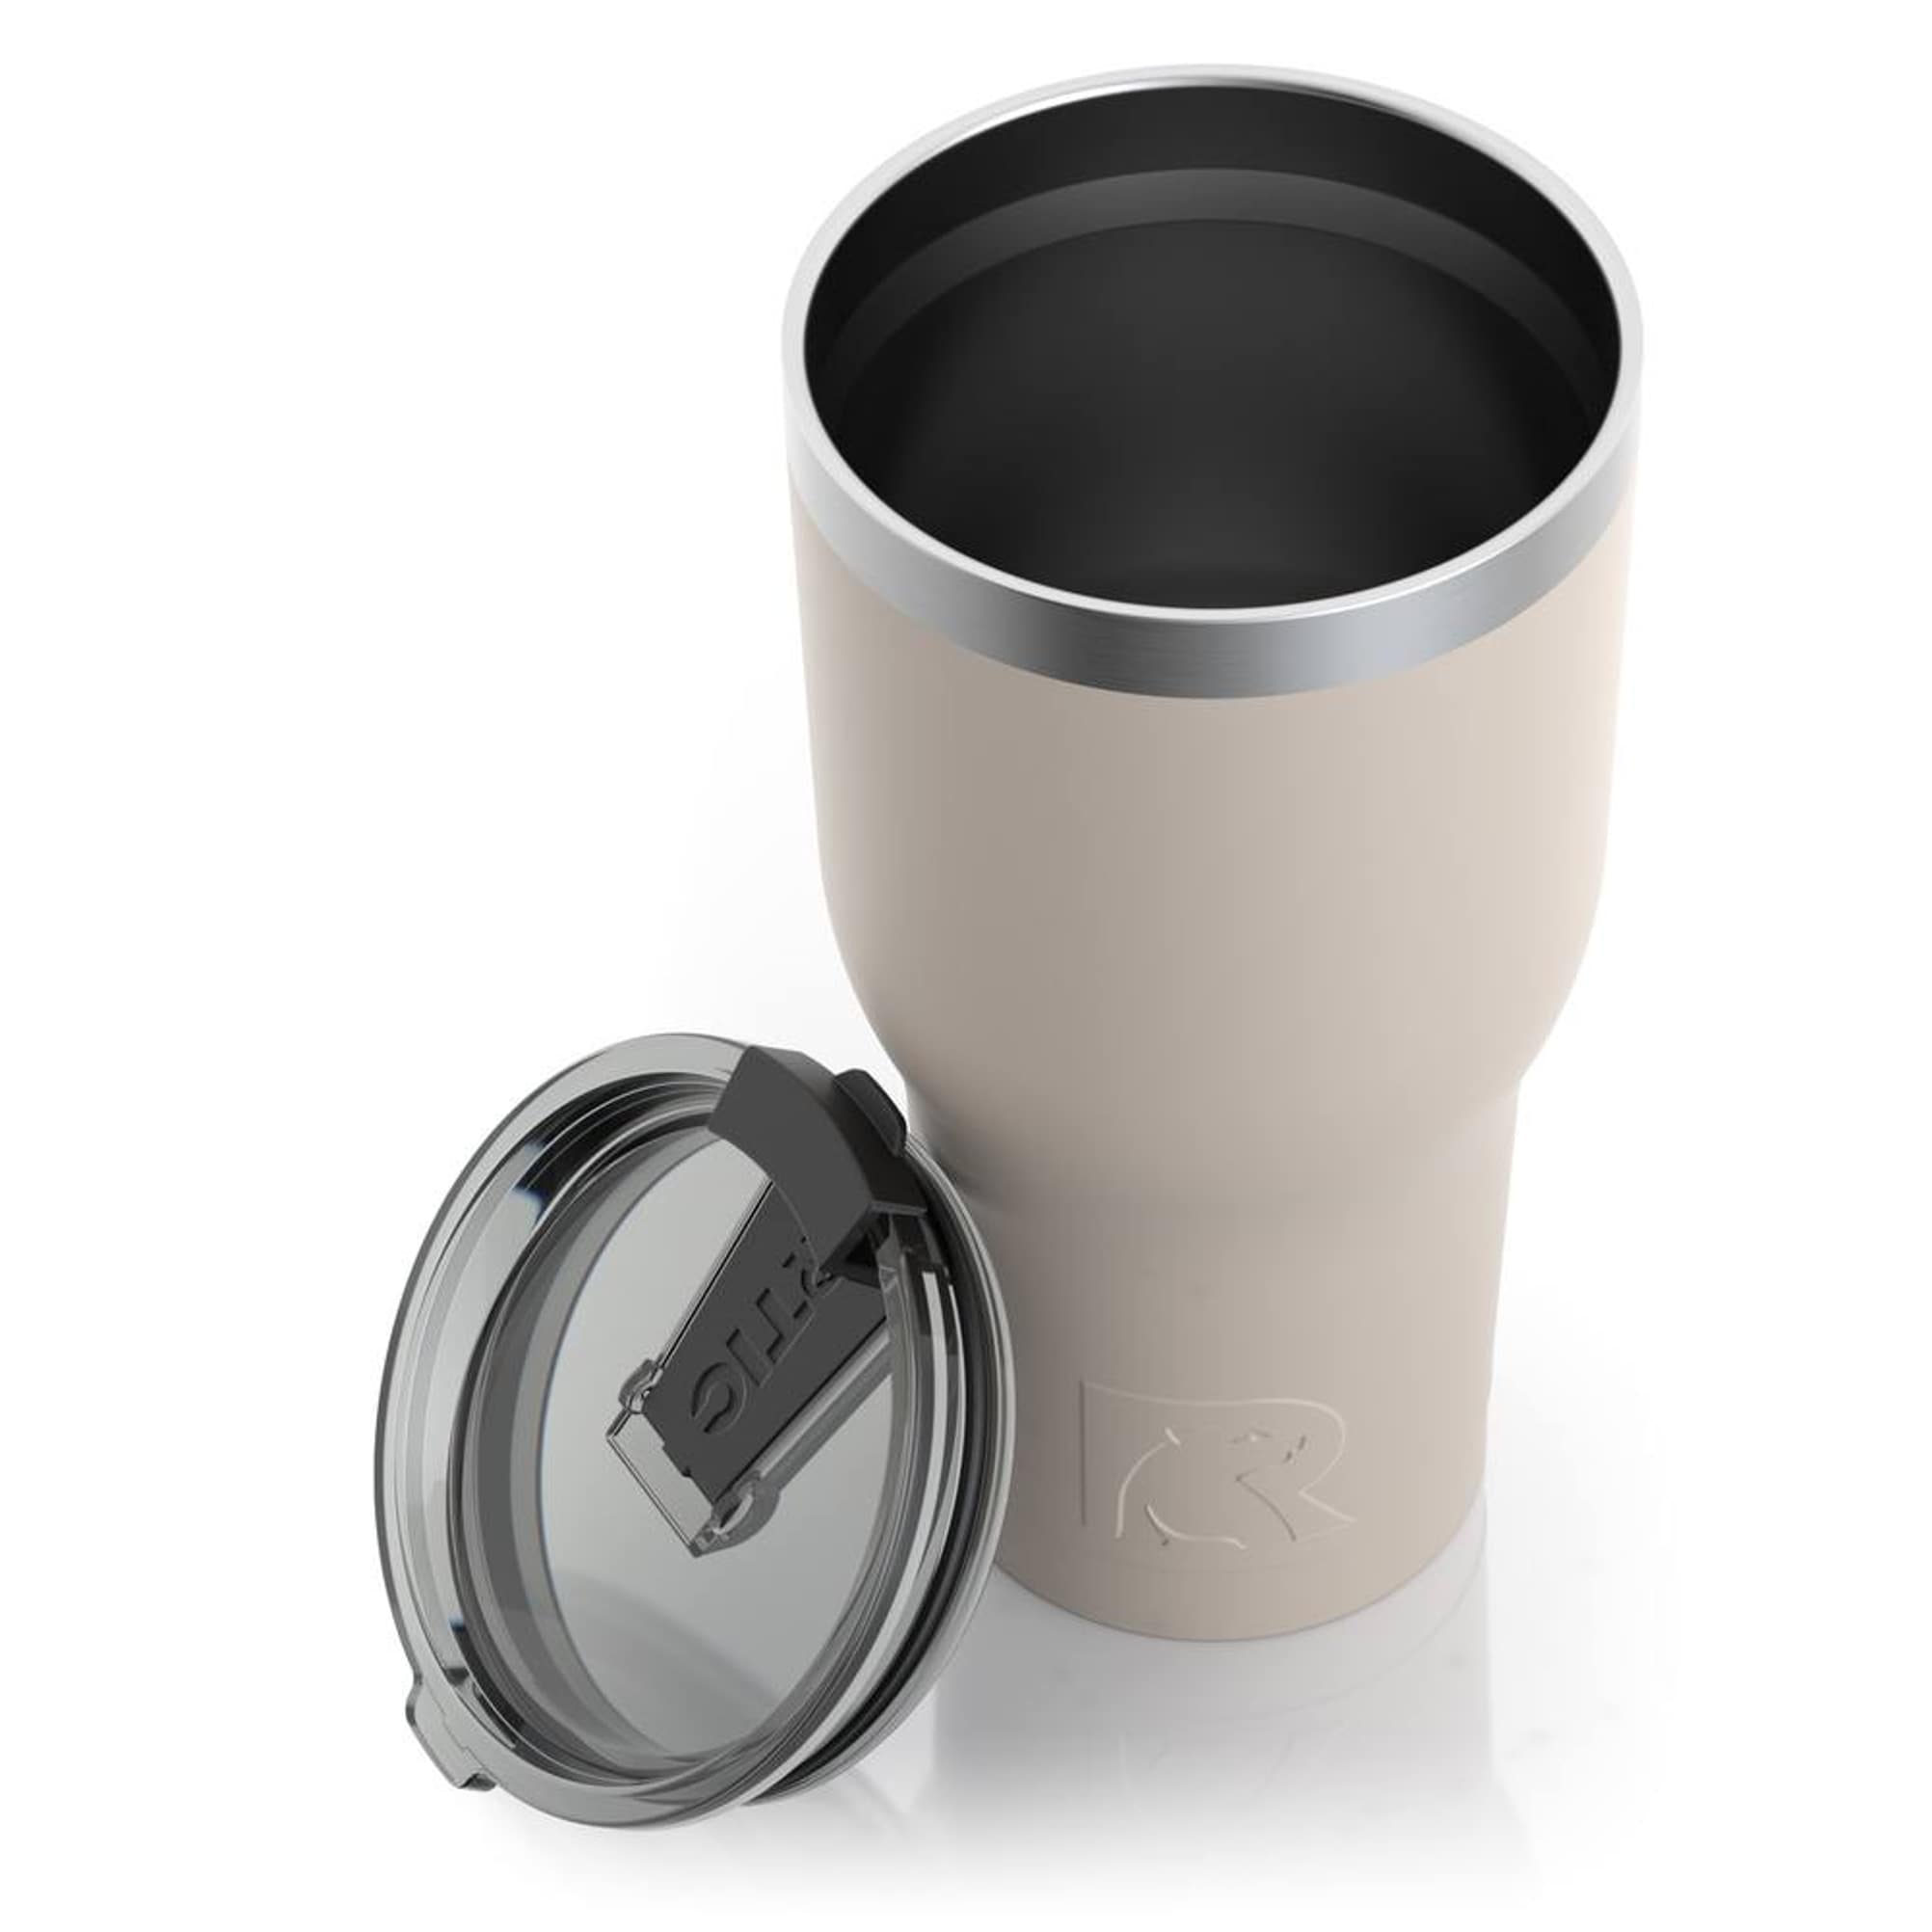 RTIC 16 oz Coffee Travel Mug with Lid and Handle, Stainless Steel  Vacuum-Insulated Mugs, Leak, Spill Proof, Hot Beverage and Cold, Portable  Thermal Tumbler Cup for Car, Camping, Polar Cap 